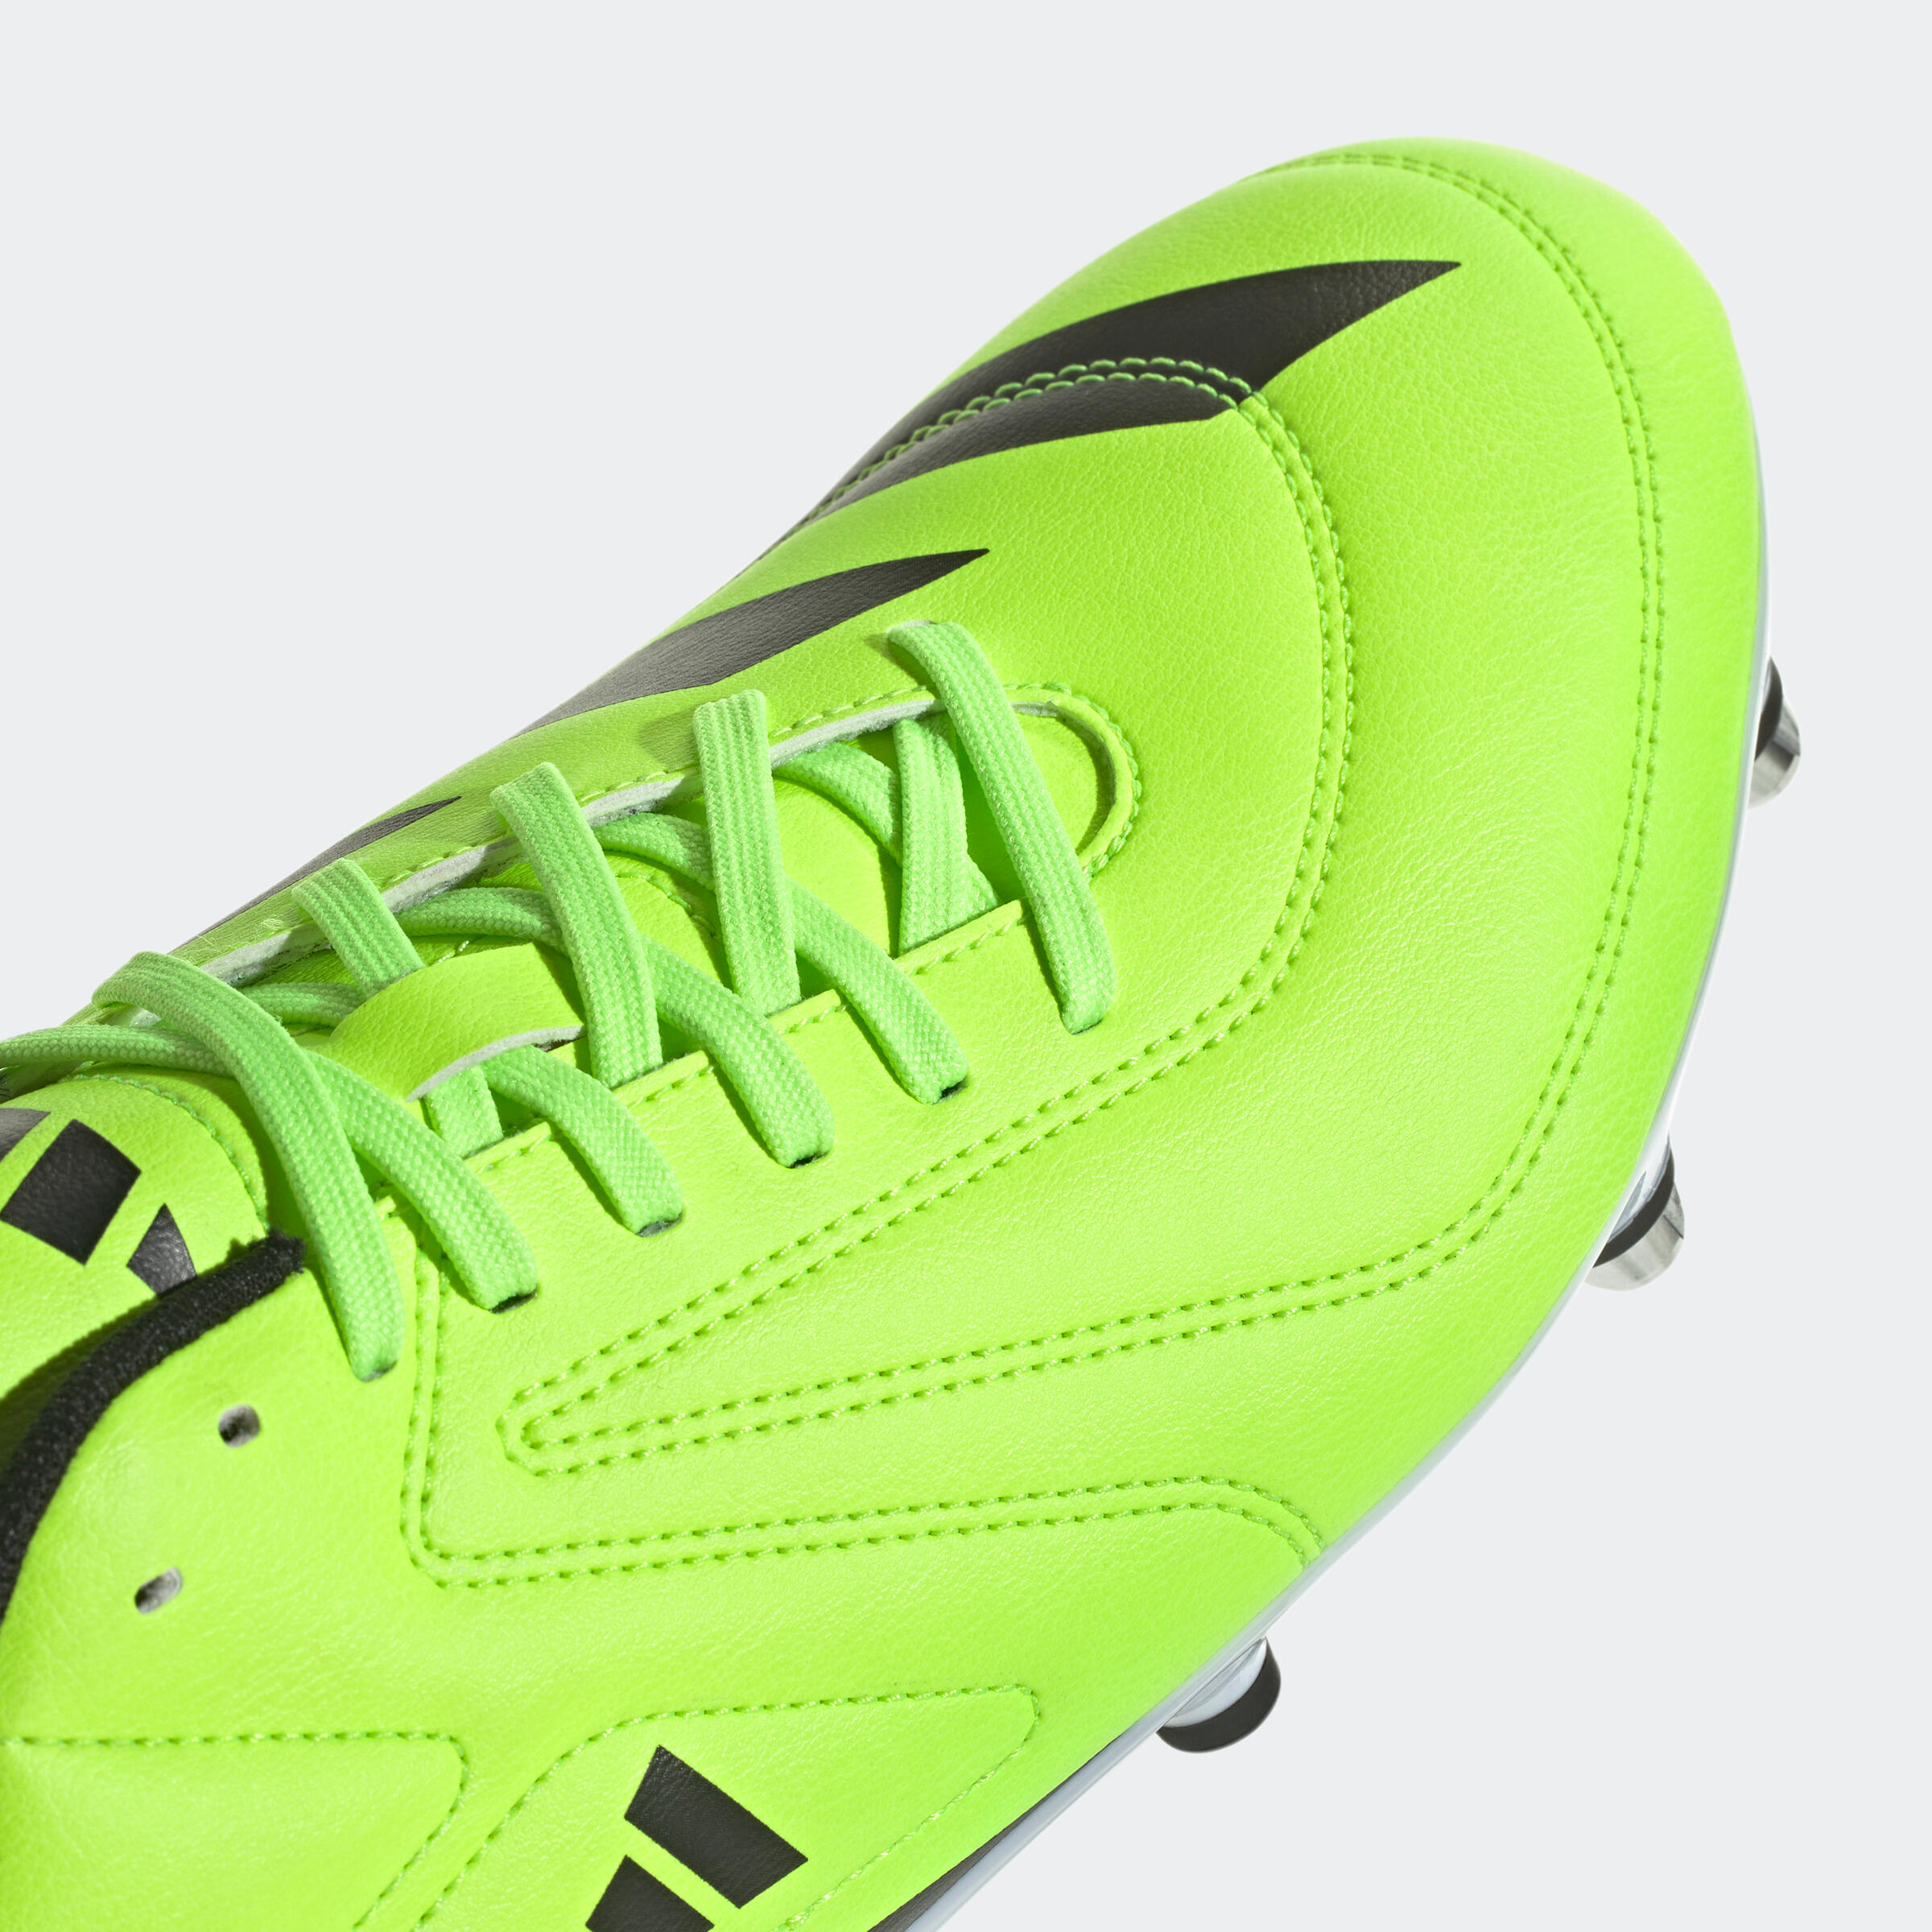 Adult Rugby Boots RS 15 SG Hybrid - Neon Yellow 7/10